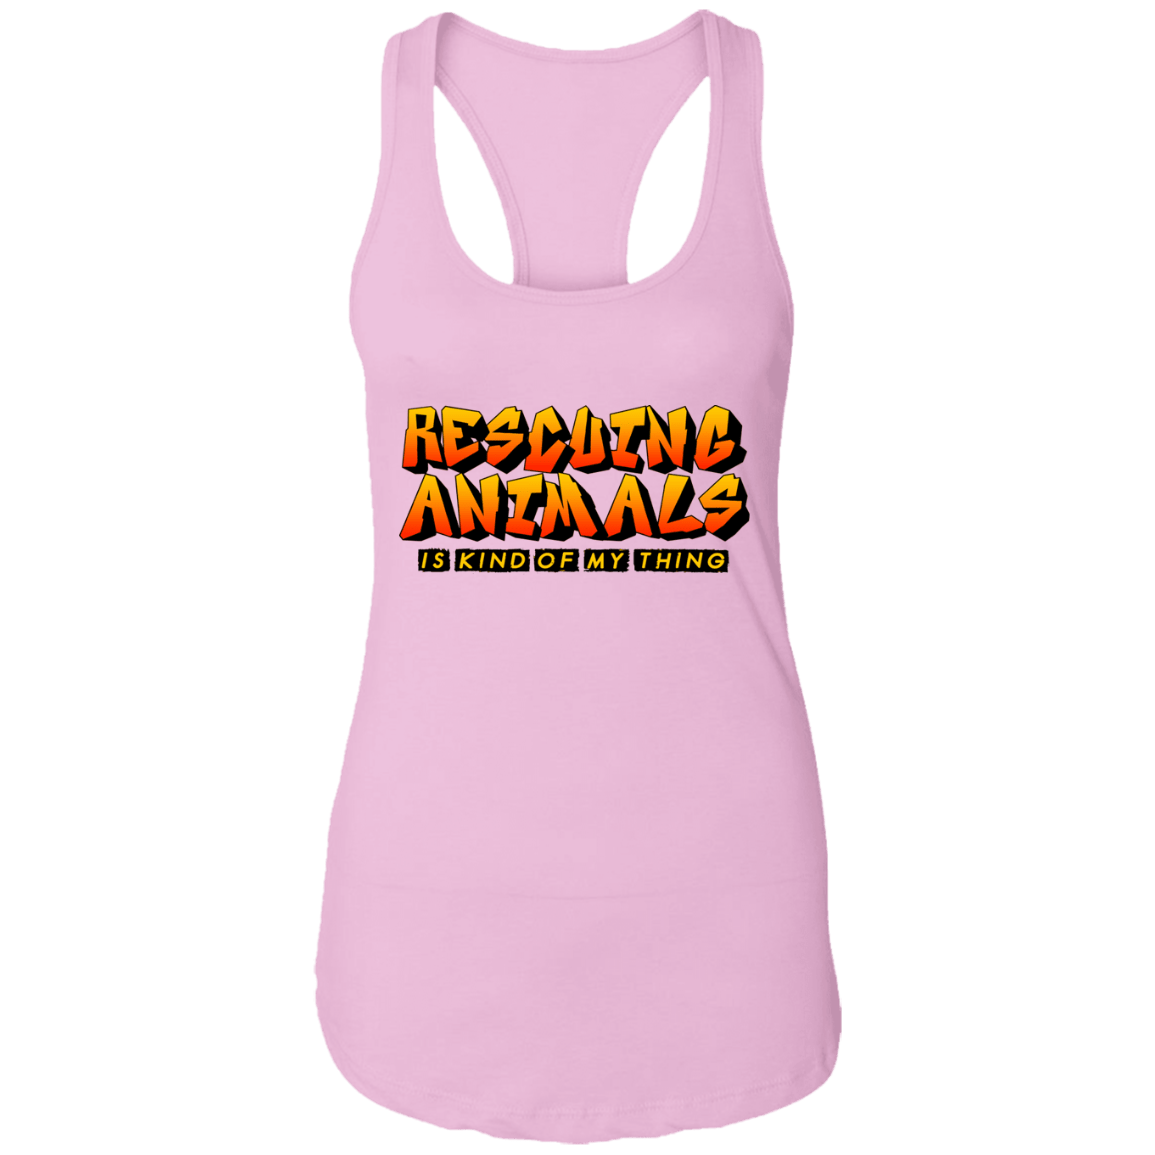 Rescuing Animals Is My Kind Of Thing - Ladies Racer Back Tank.